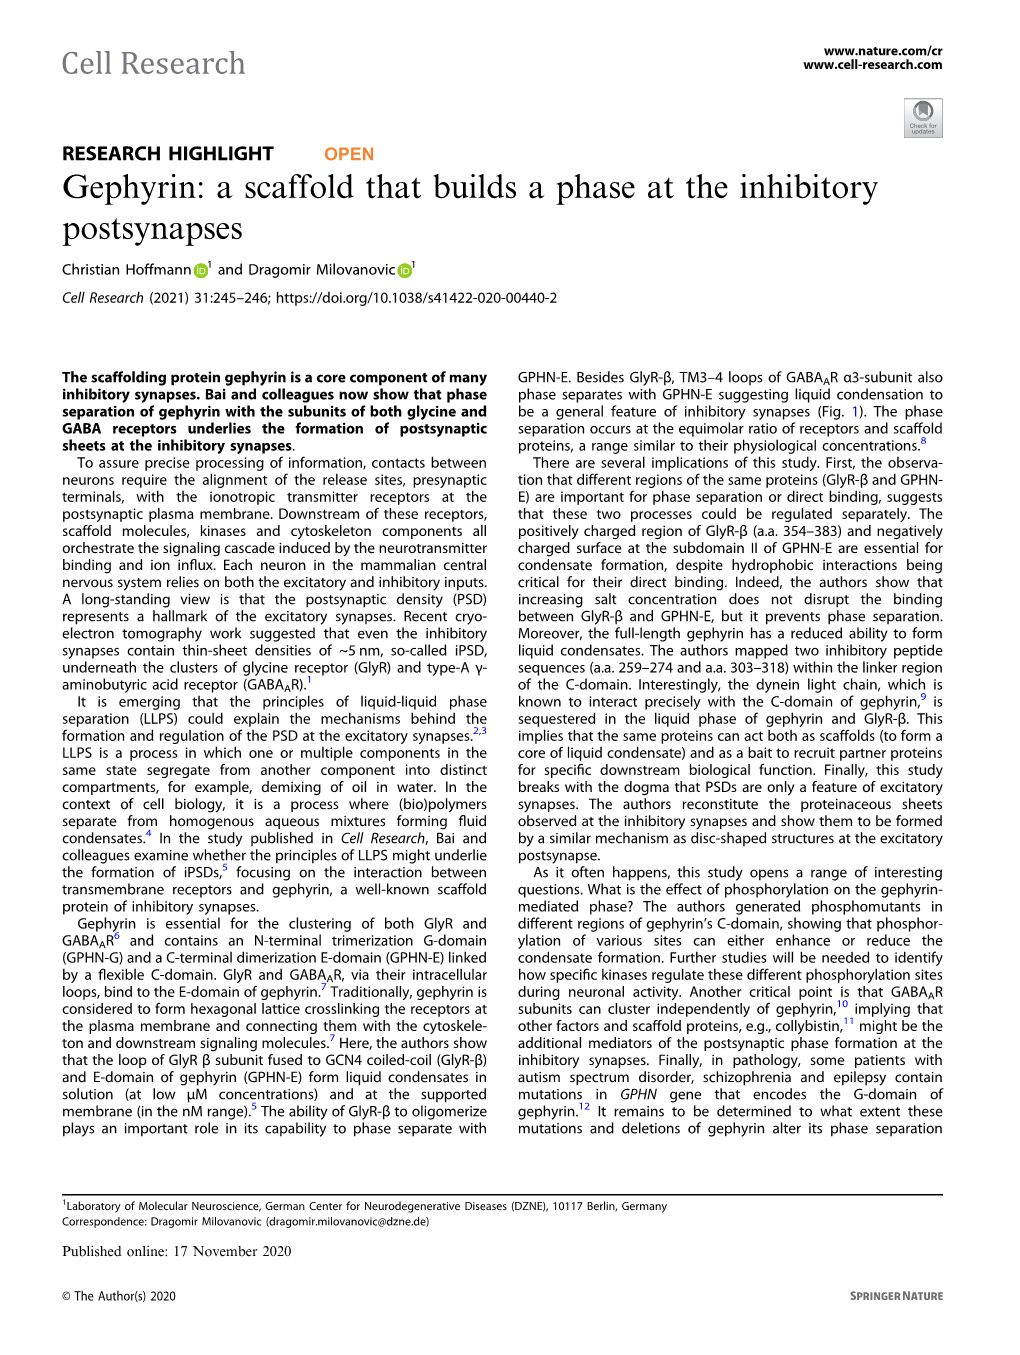 Gephyrin: a Scaffold That Builds a Phase at the Inhibitory Postsynapses